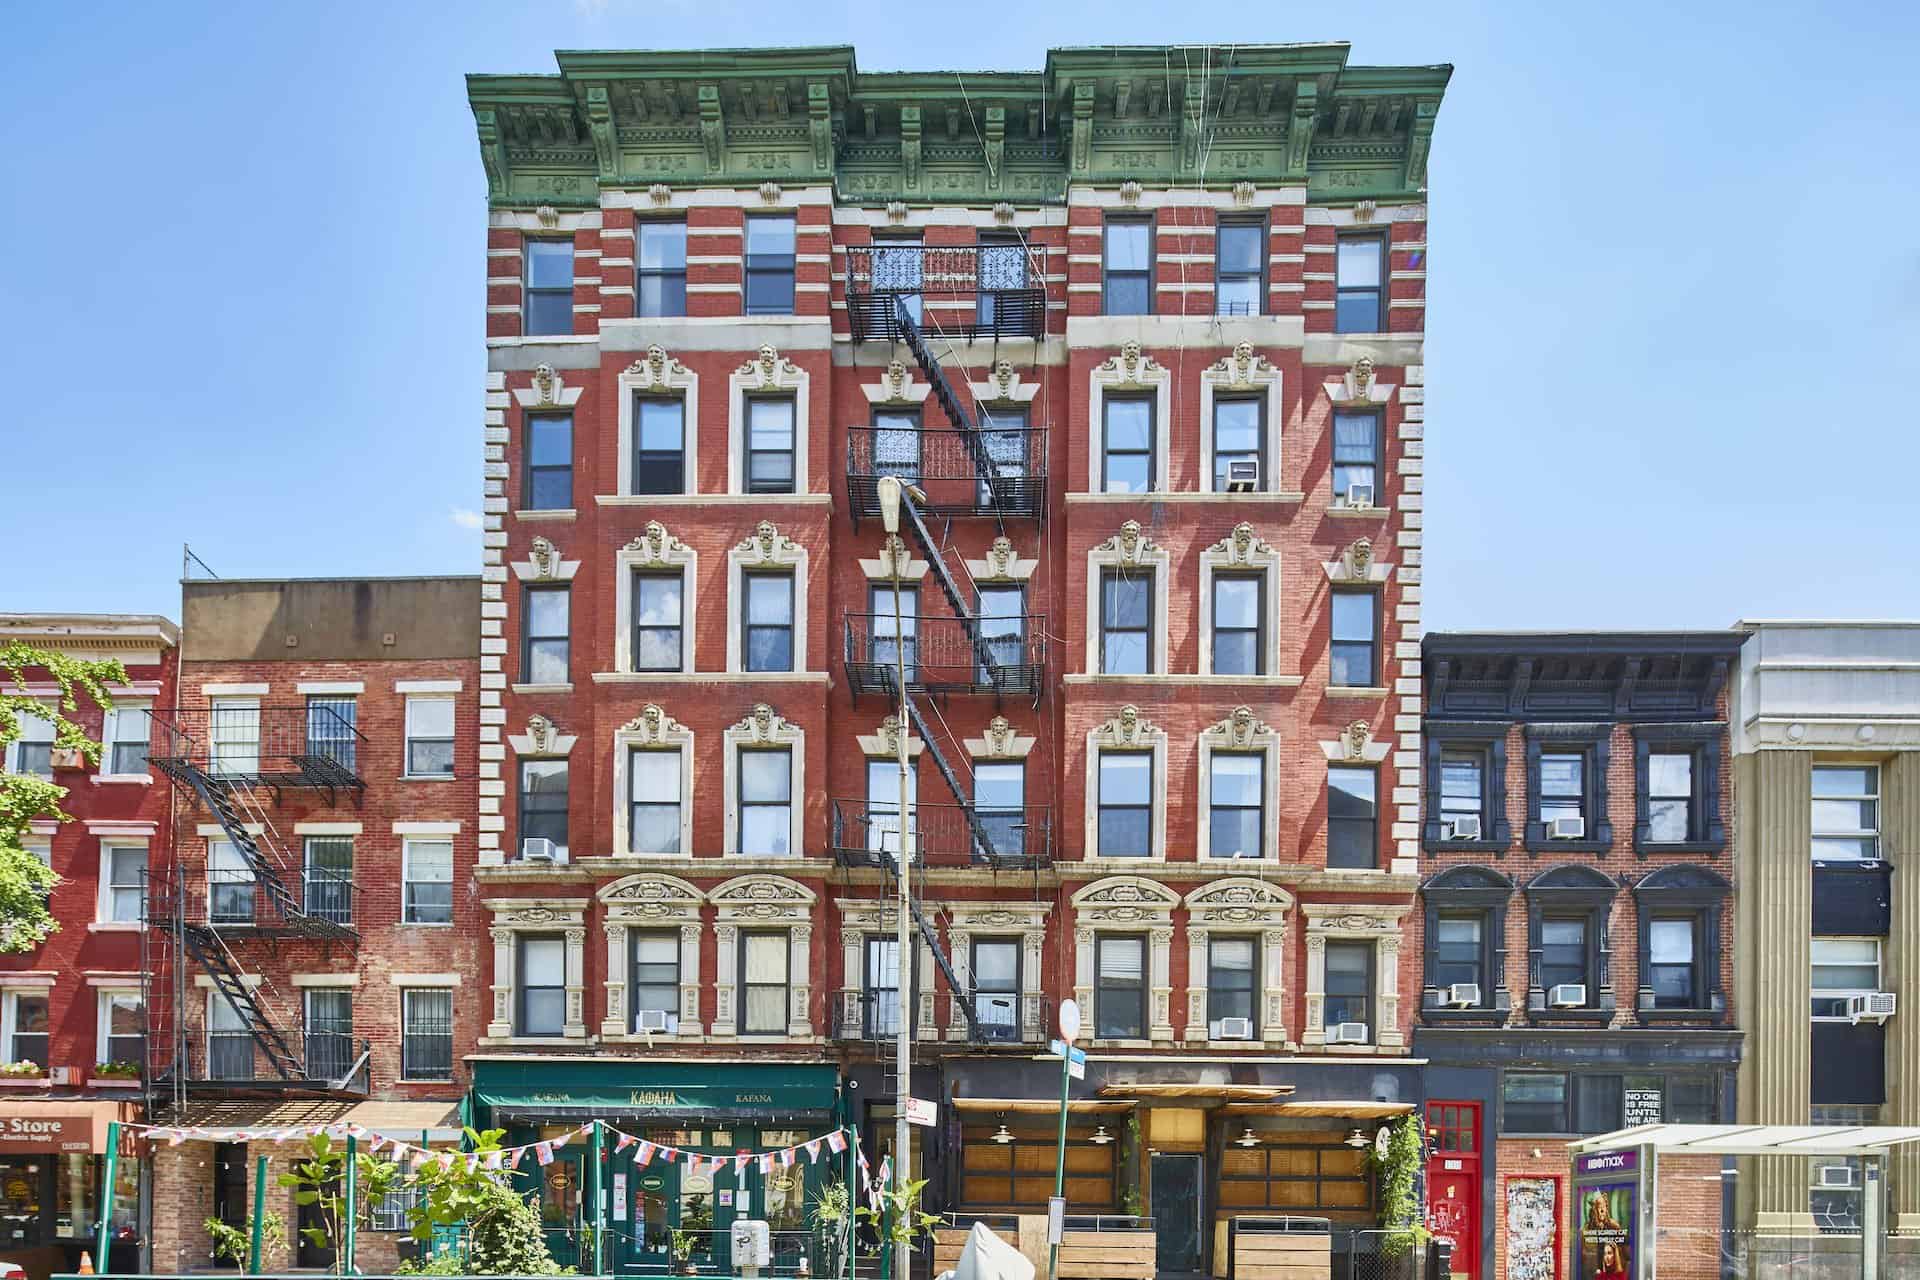 Street view of 112-116 Avenue C apartments in New York. Tall red brick building with white bricks bordering the windows.